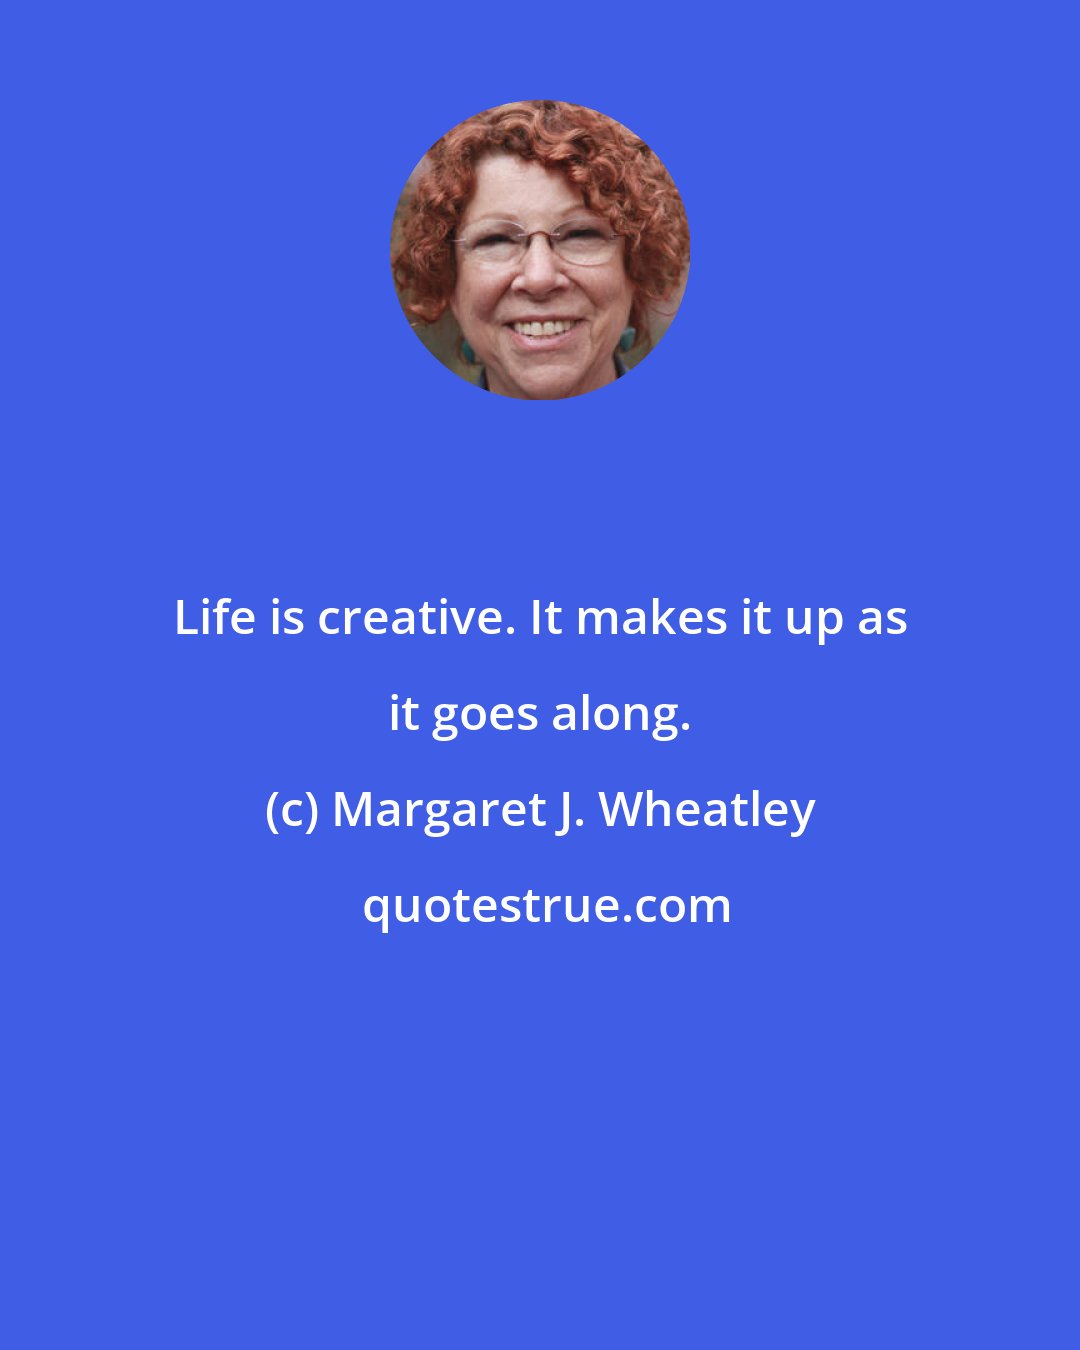 Margaret J. Wheatley: Life is creative. It makes it up as it goes along.